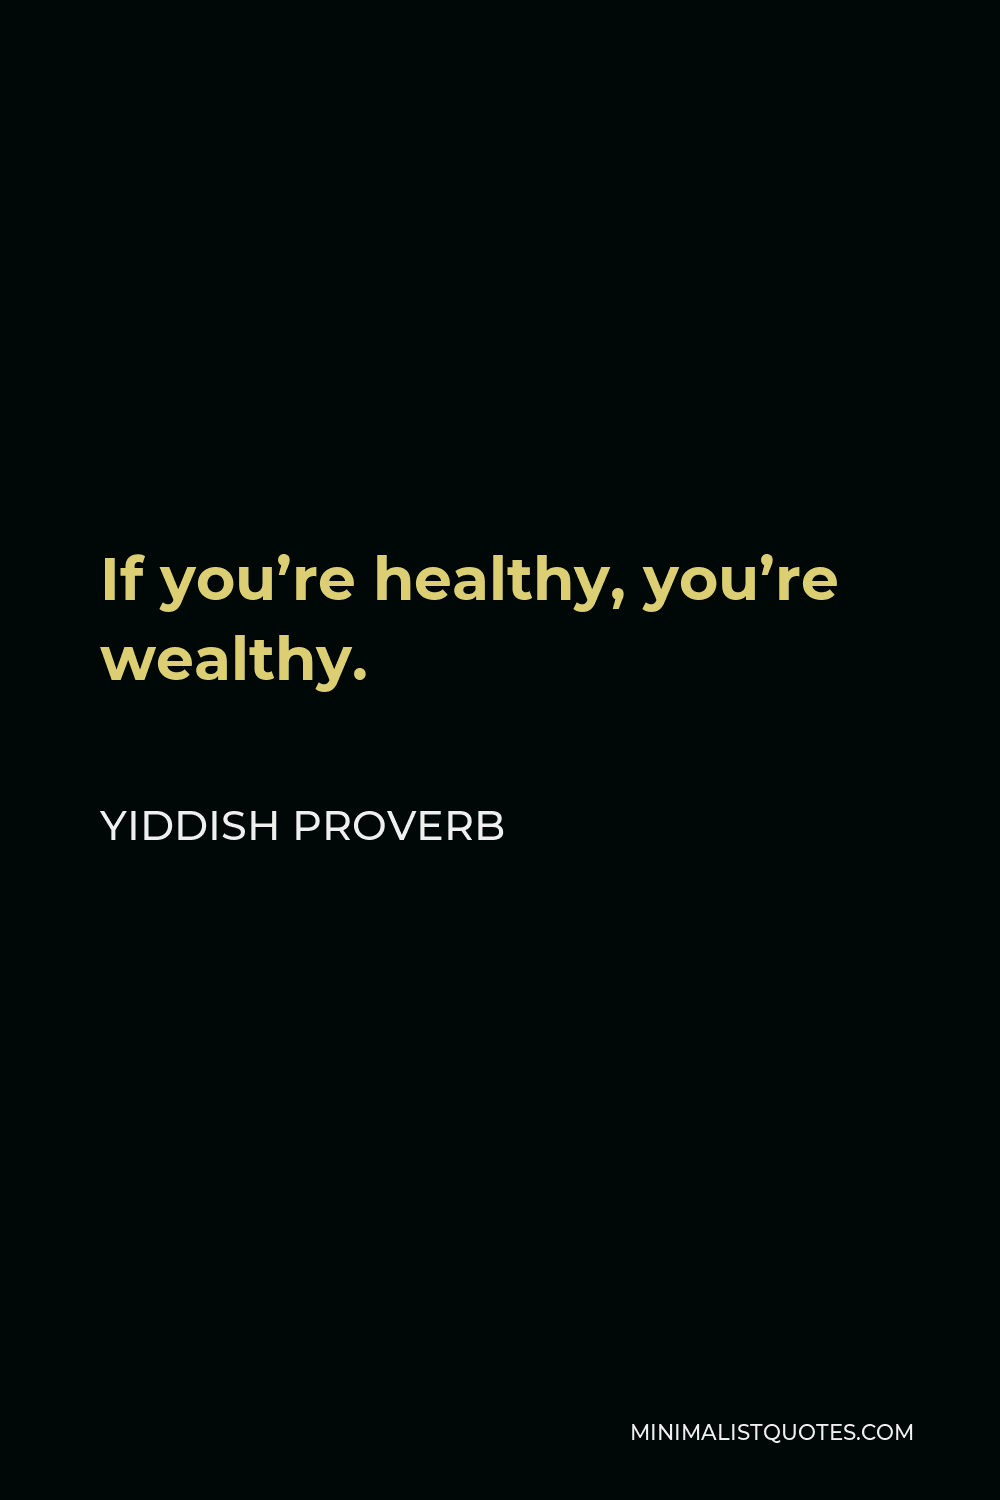 Yiddish Proverb Quote - If you’re healthy, you’re wealthy.